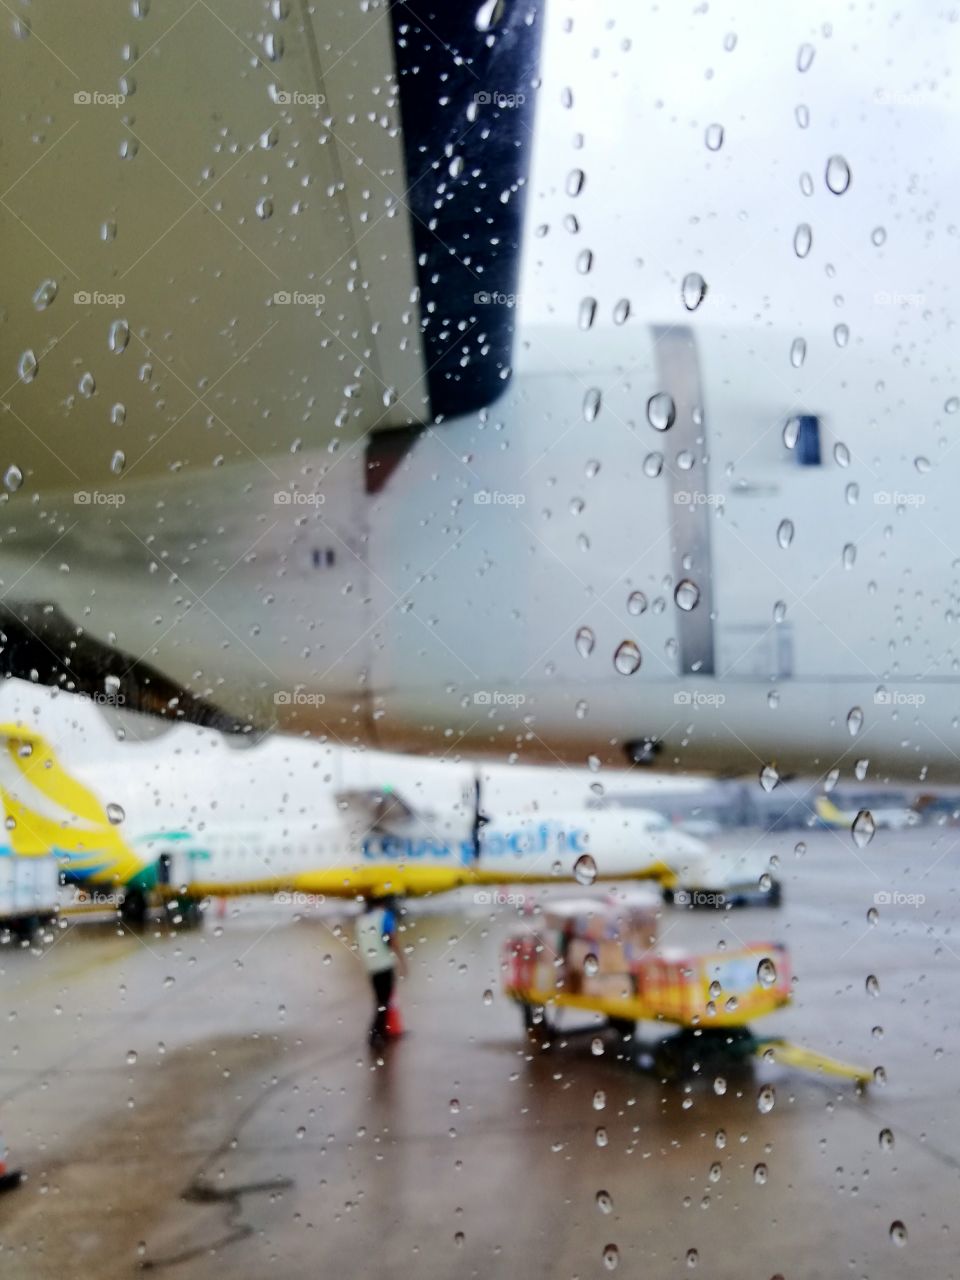 Outside the window of an airplane on a rainy day.